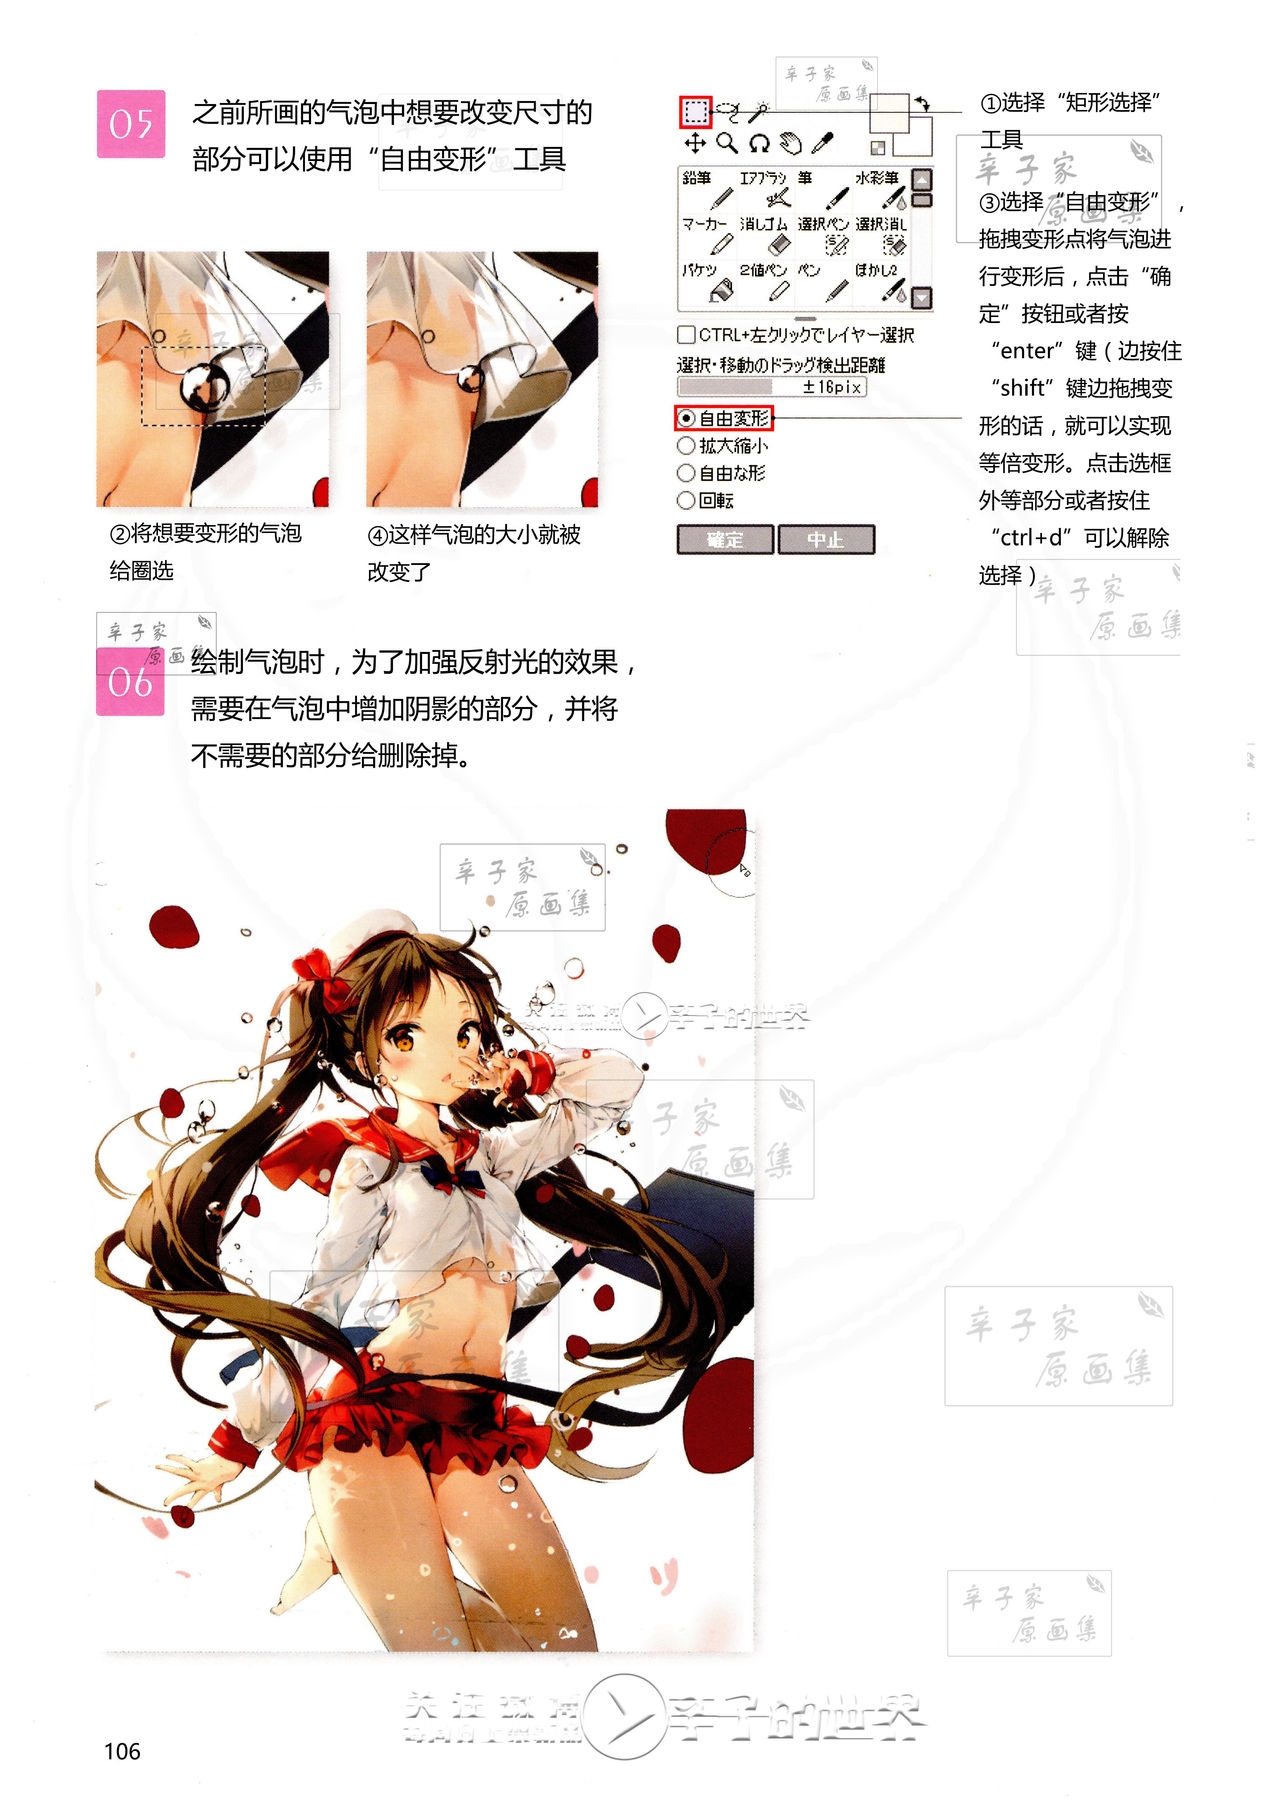 [Anmi] Lets Make ★ Character CG illustration techniques vol.9 [Chinese] 104